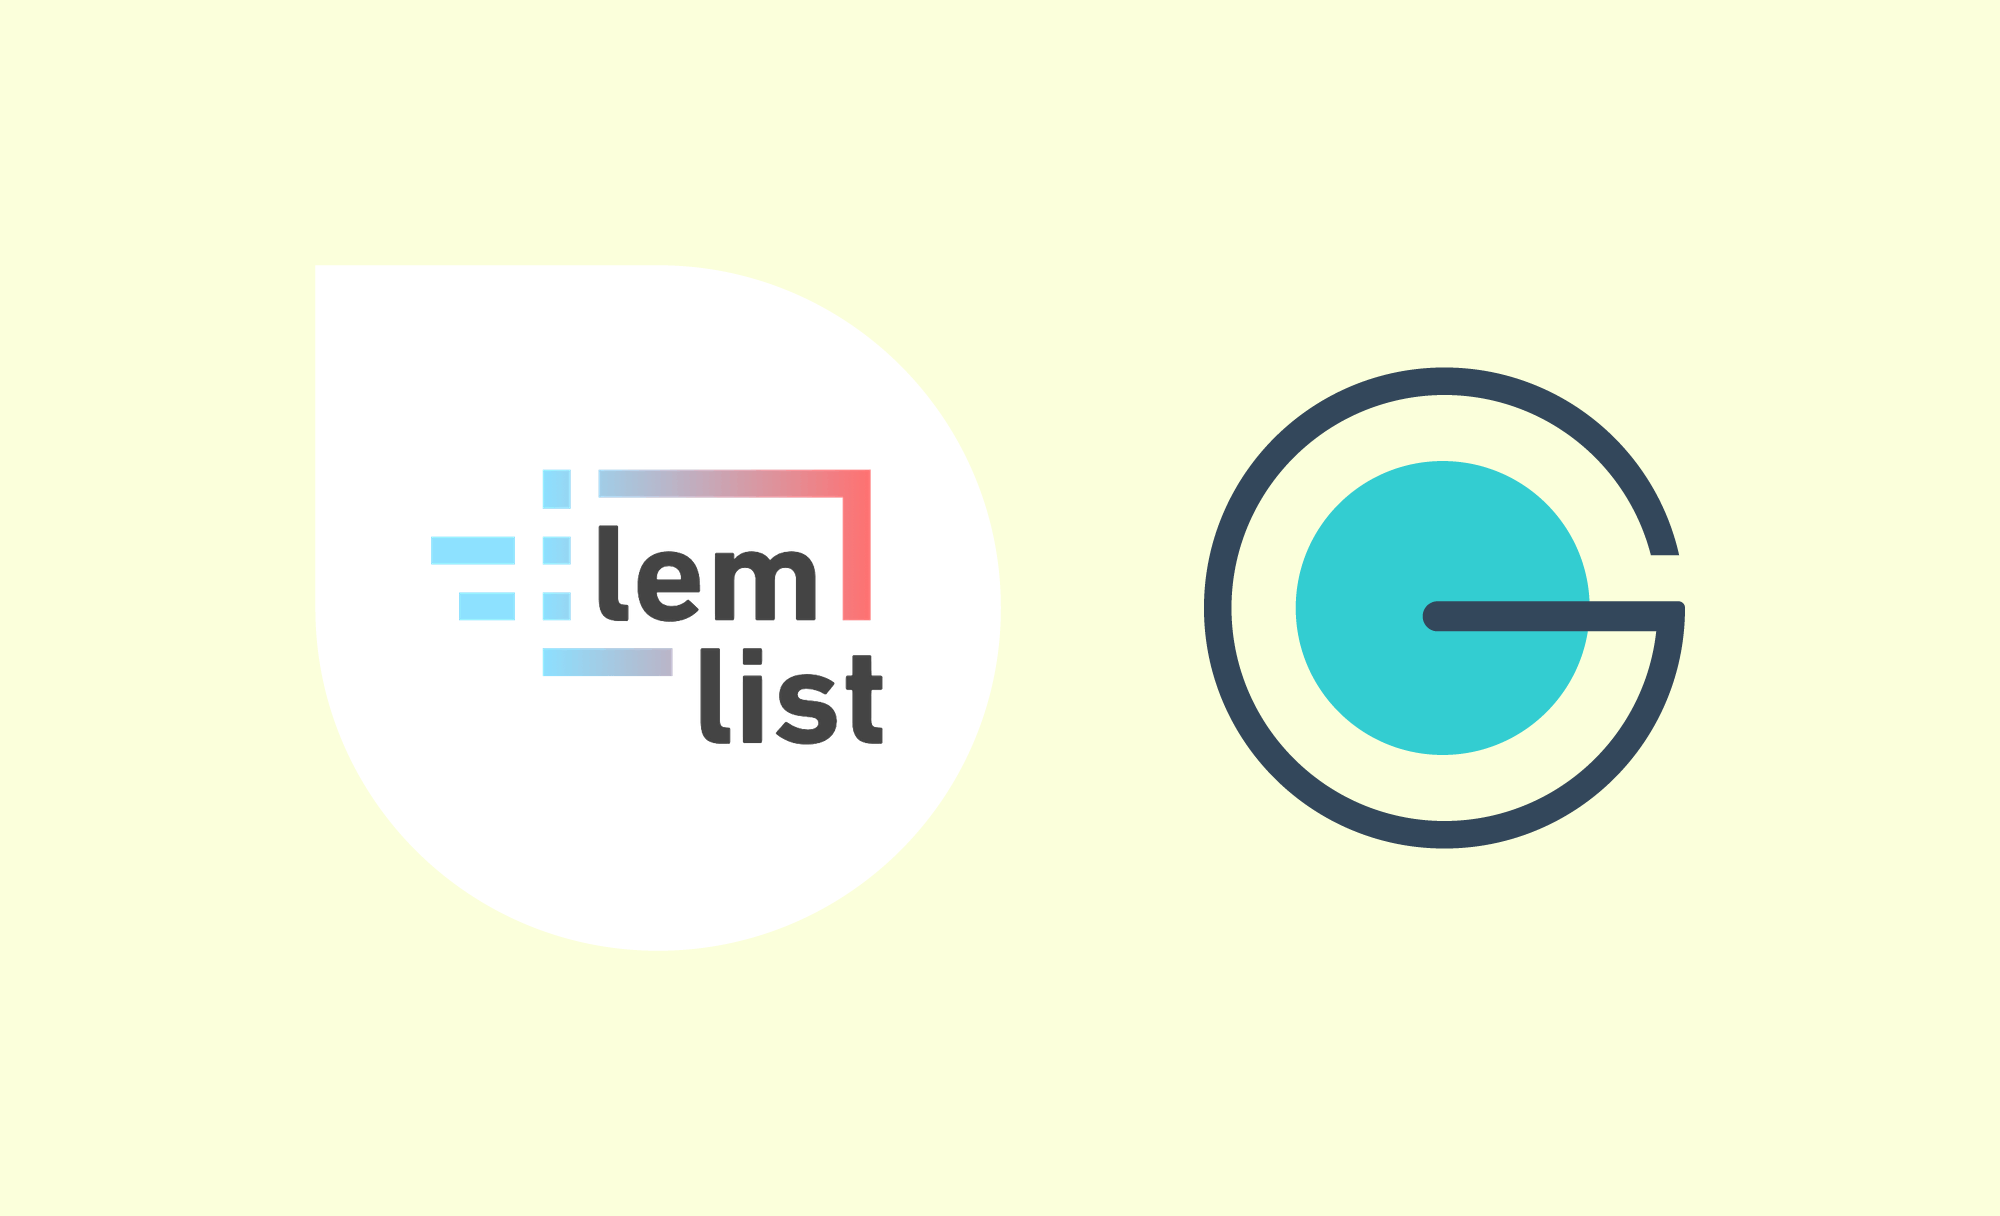 Groupboss+Lemlist: Collect Emails from Facebook Groups & Close Them with Lemlist